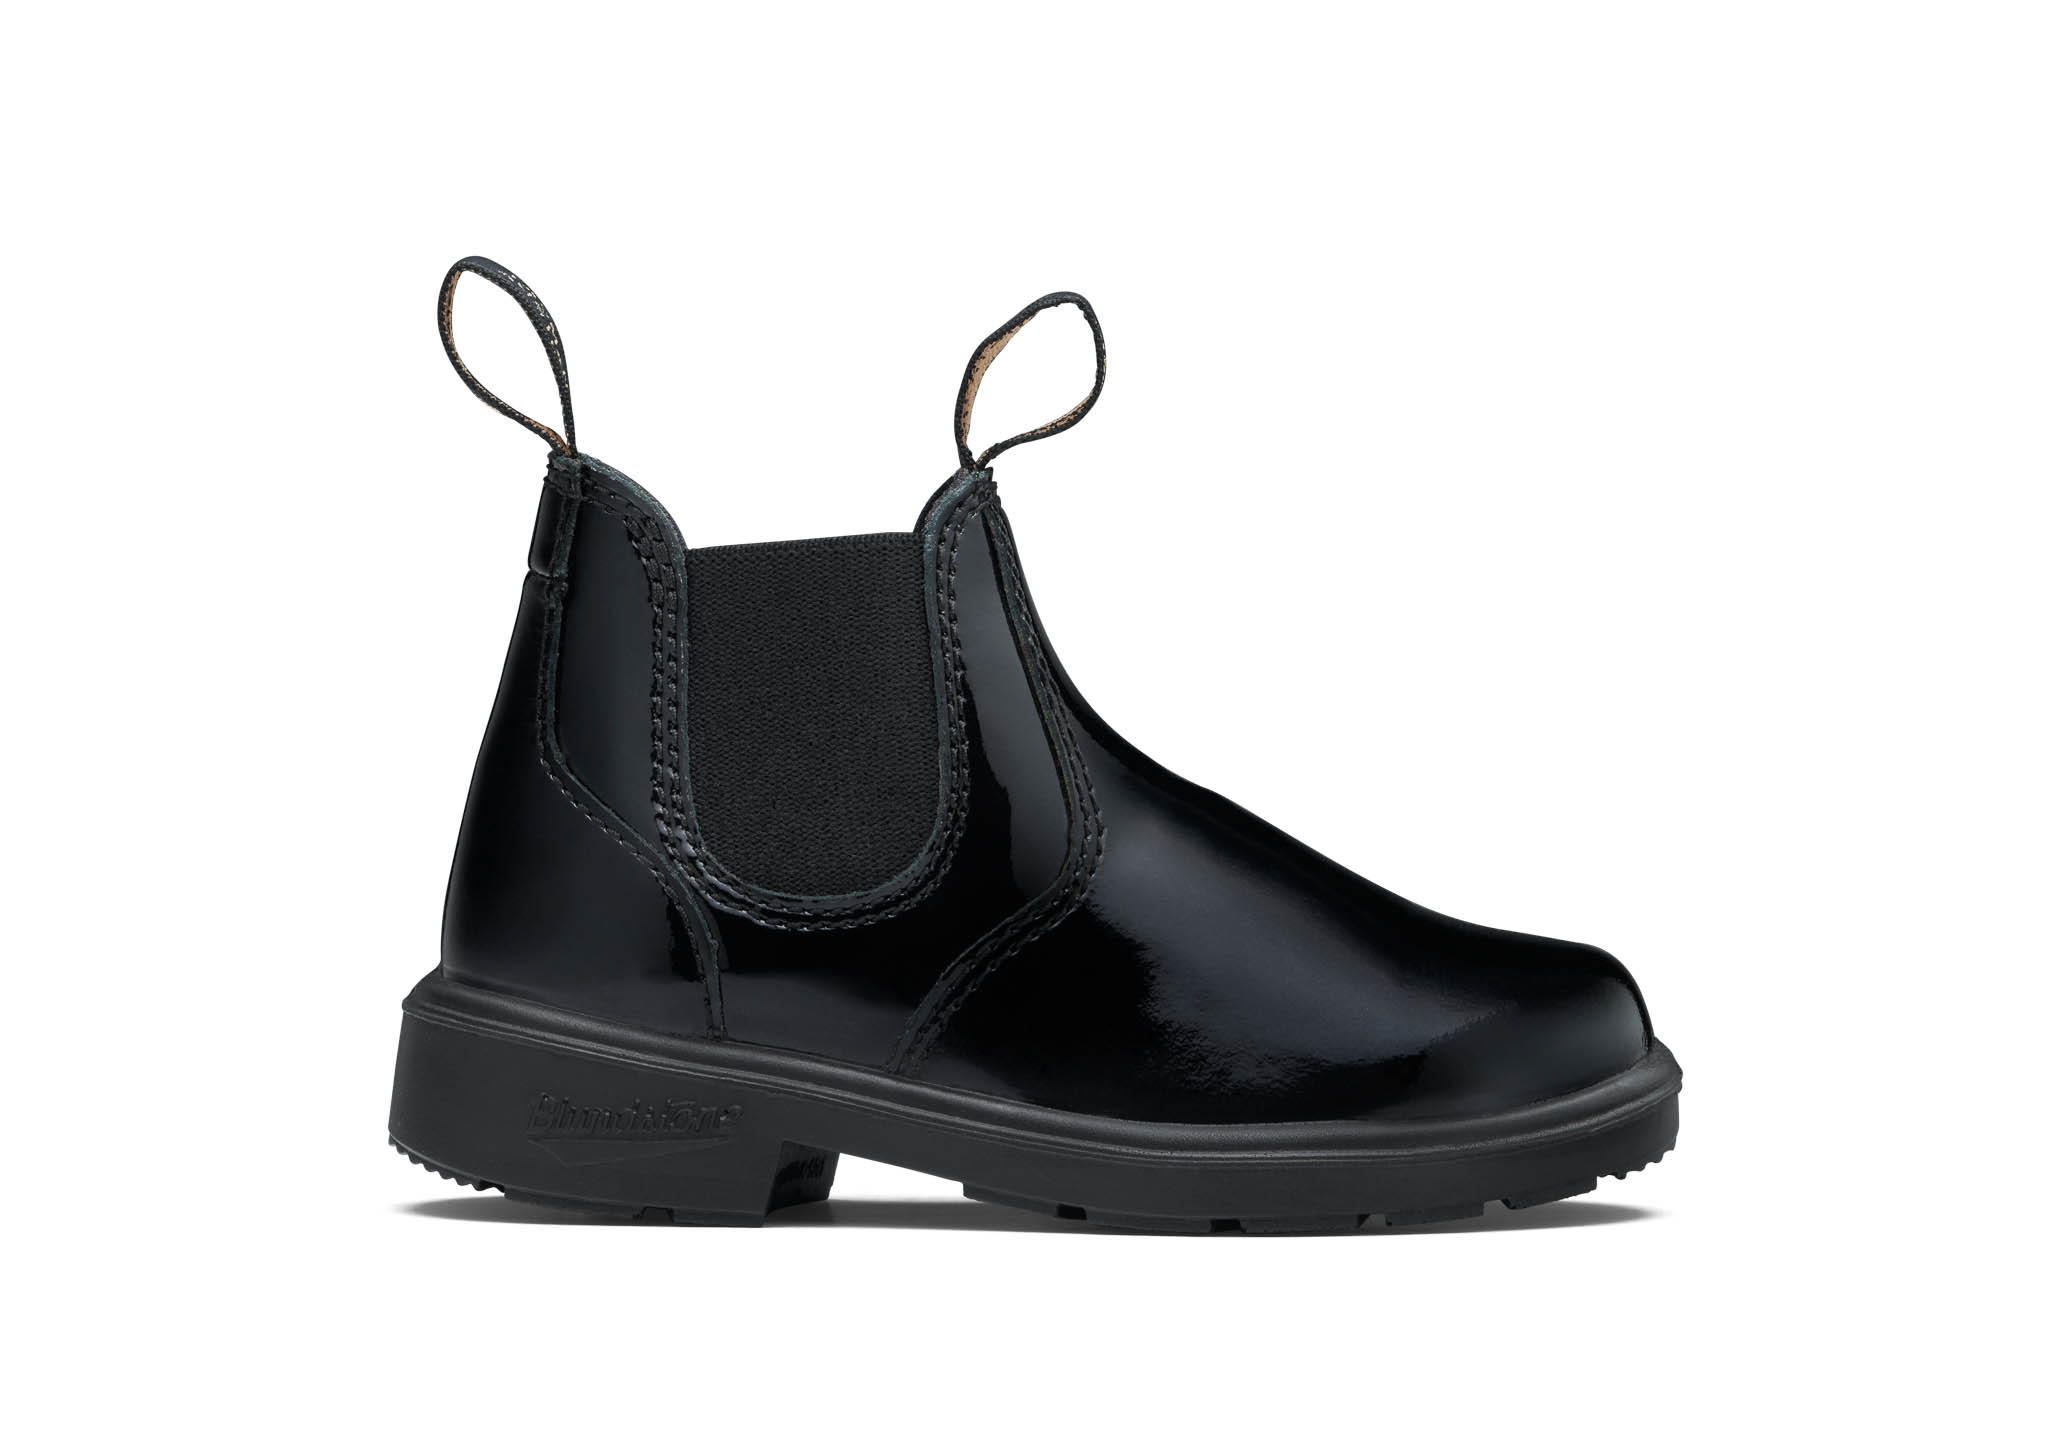 Blundstone 2255 Black Patent Patent Leather (Kids) Leather